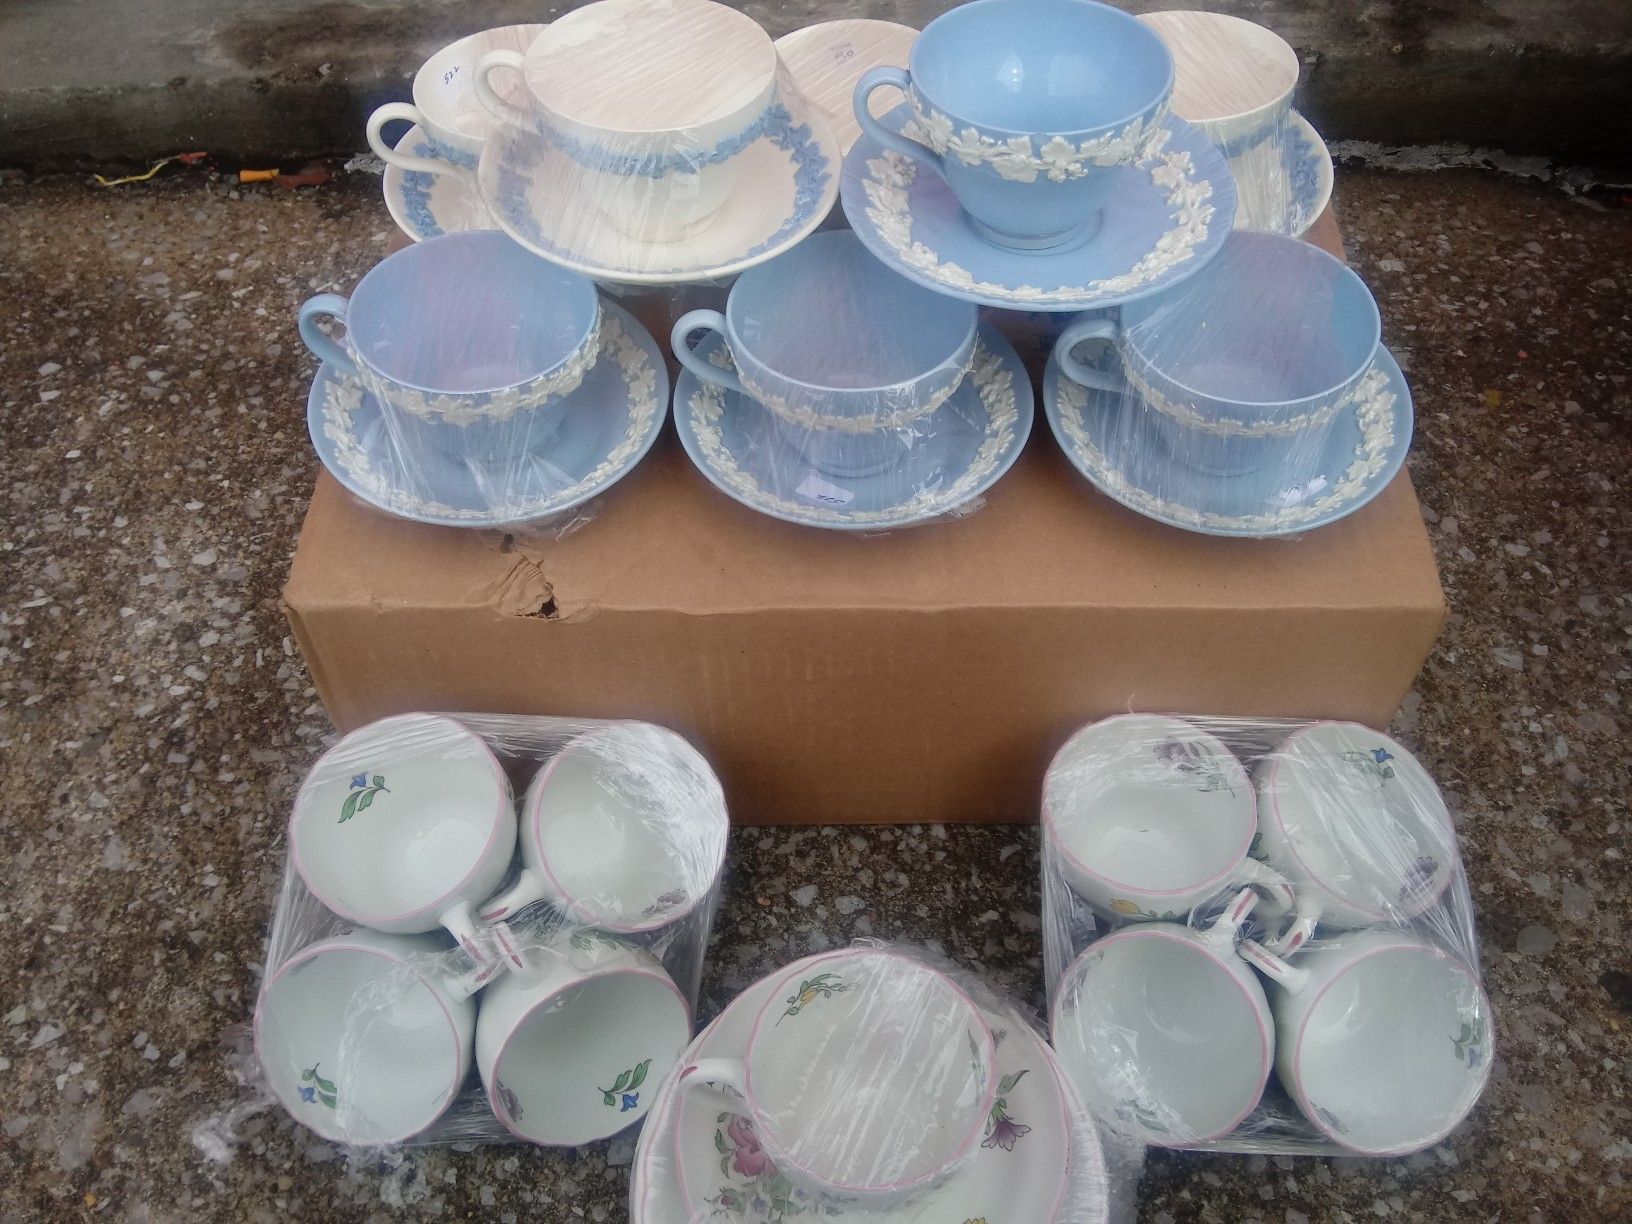 English cups and salser sets